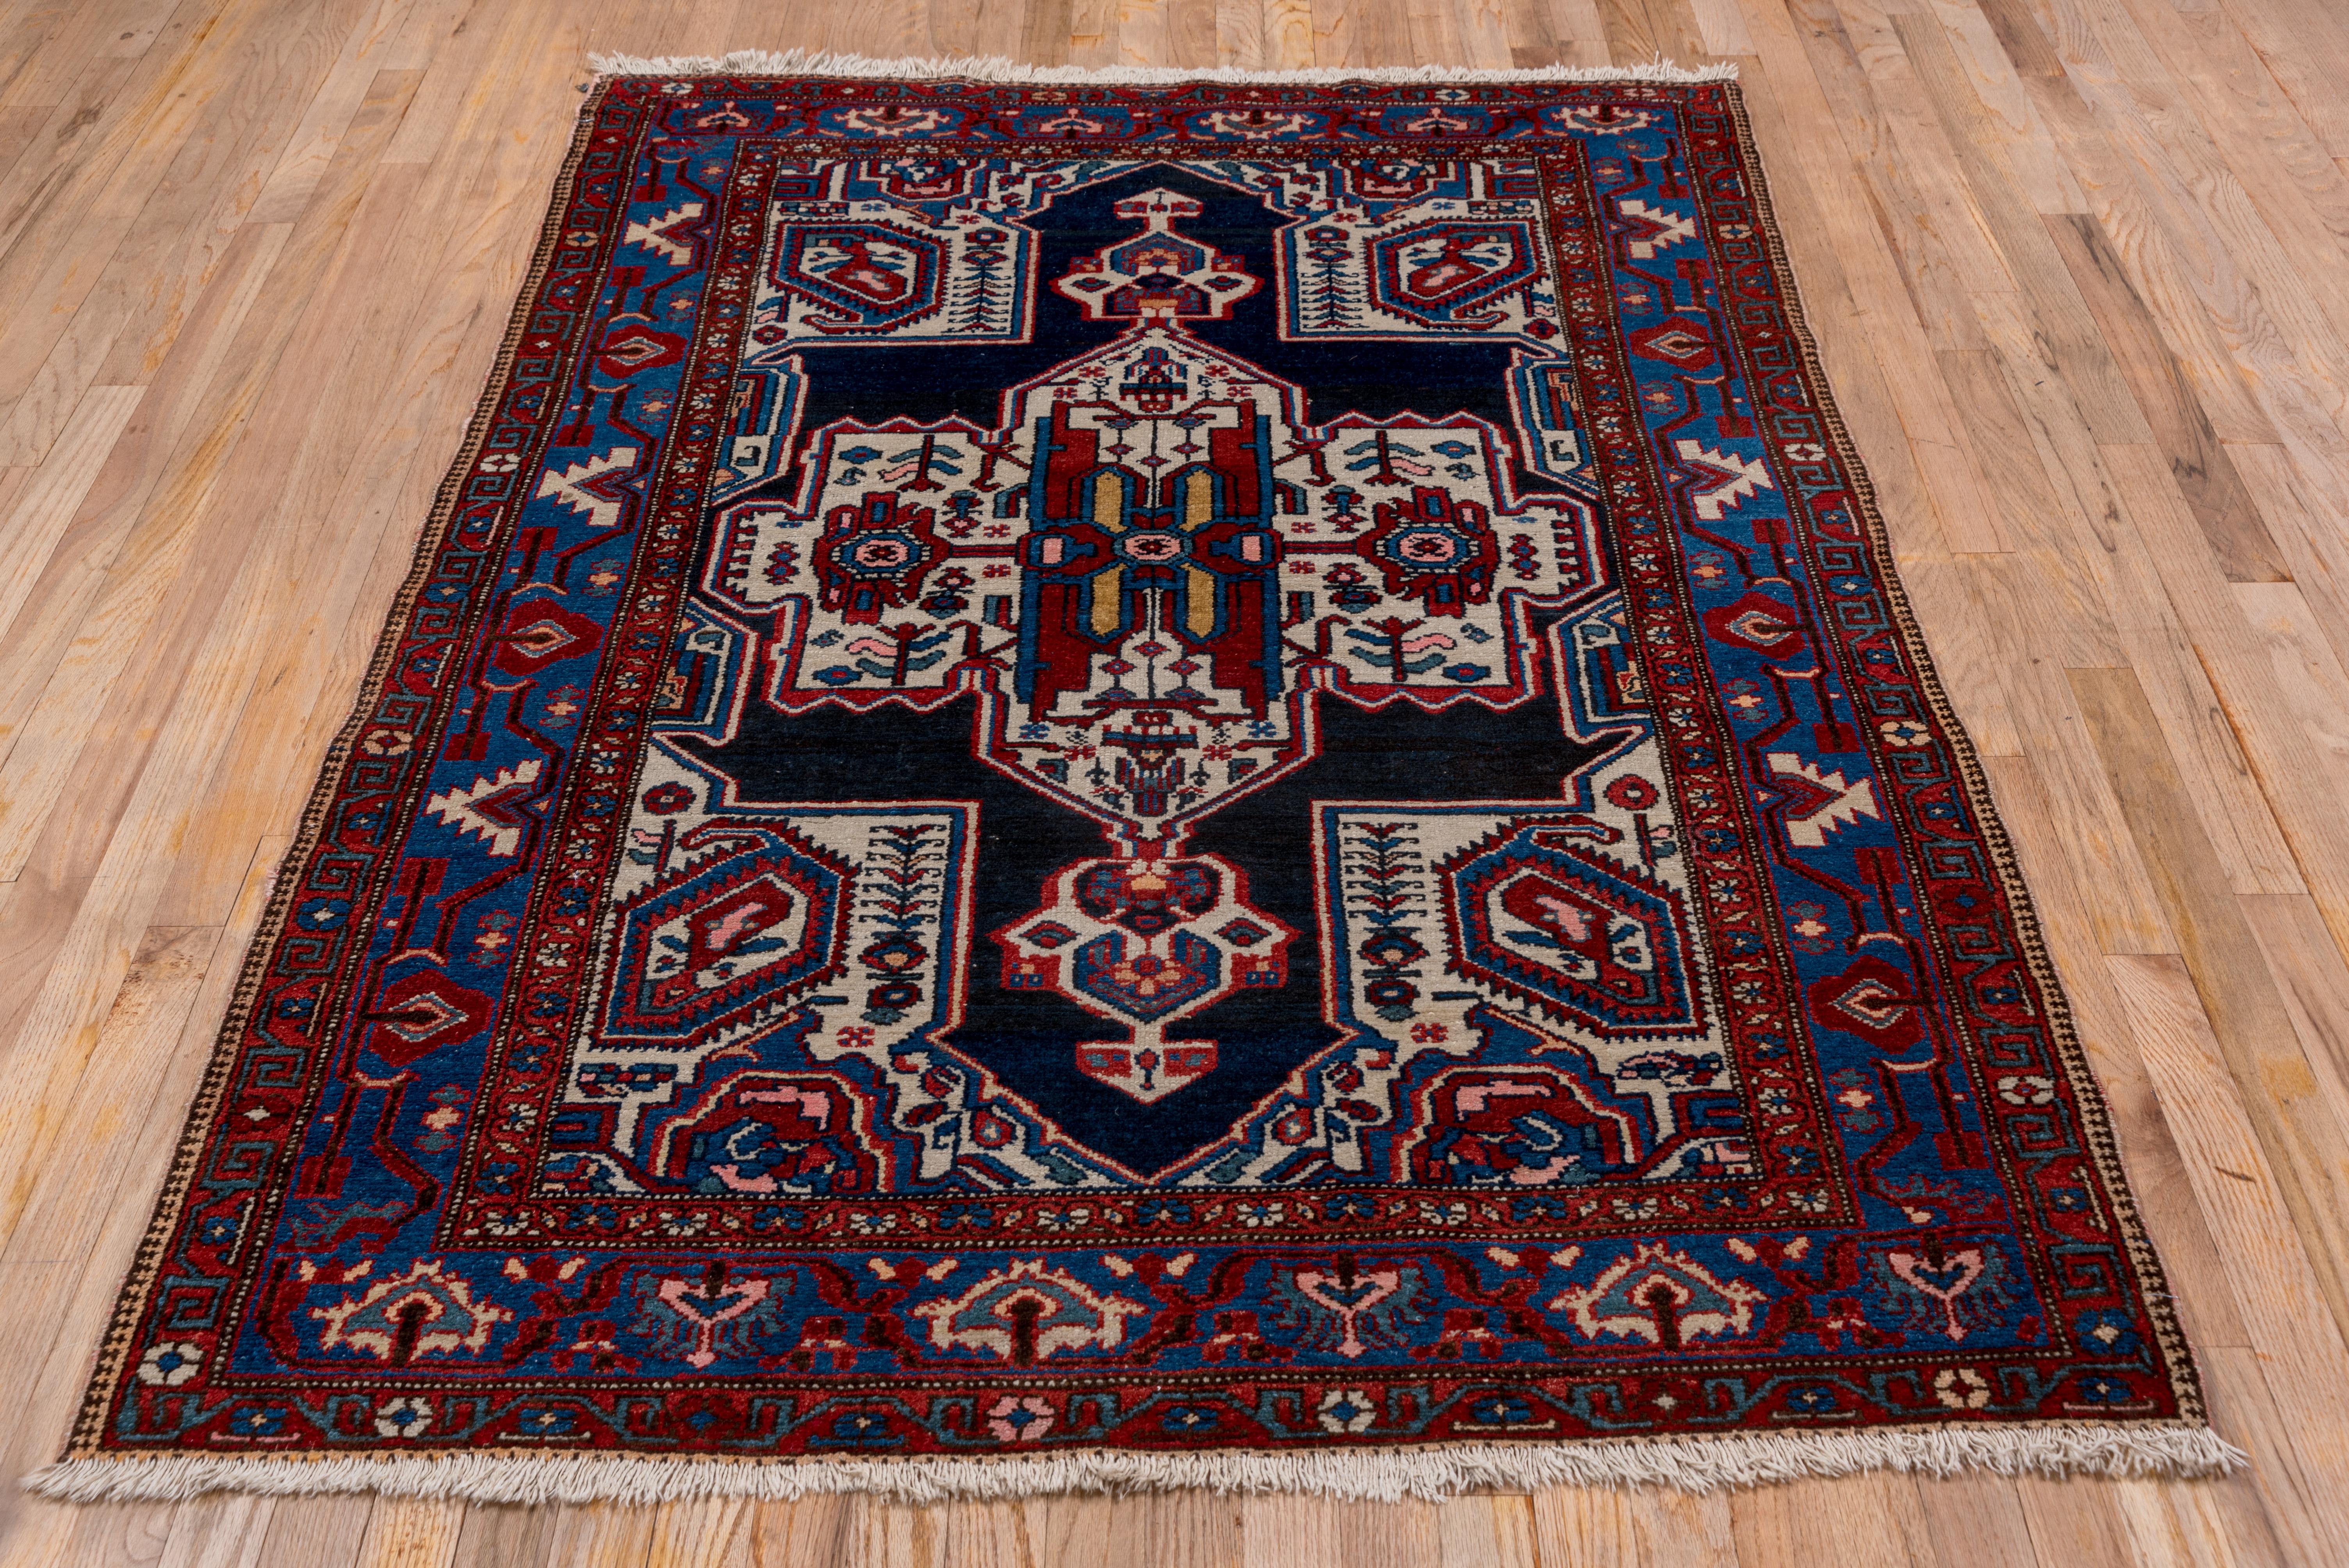 1920s Antique Persian Malayer Rugm Ivory & Navy Field, Red & Royal Blue Borders In Good Condition For Sale In New York, NY